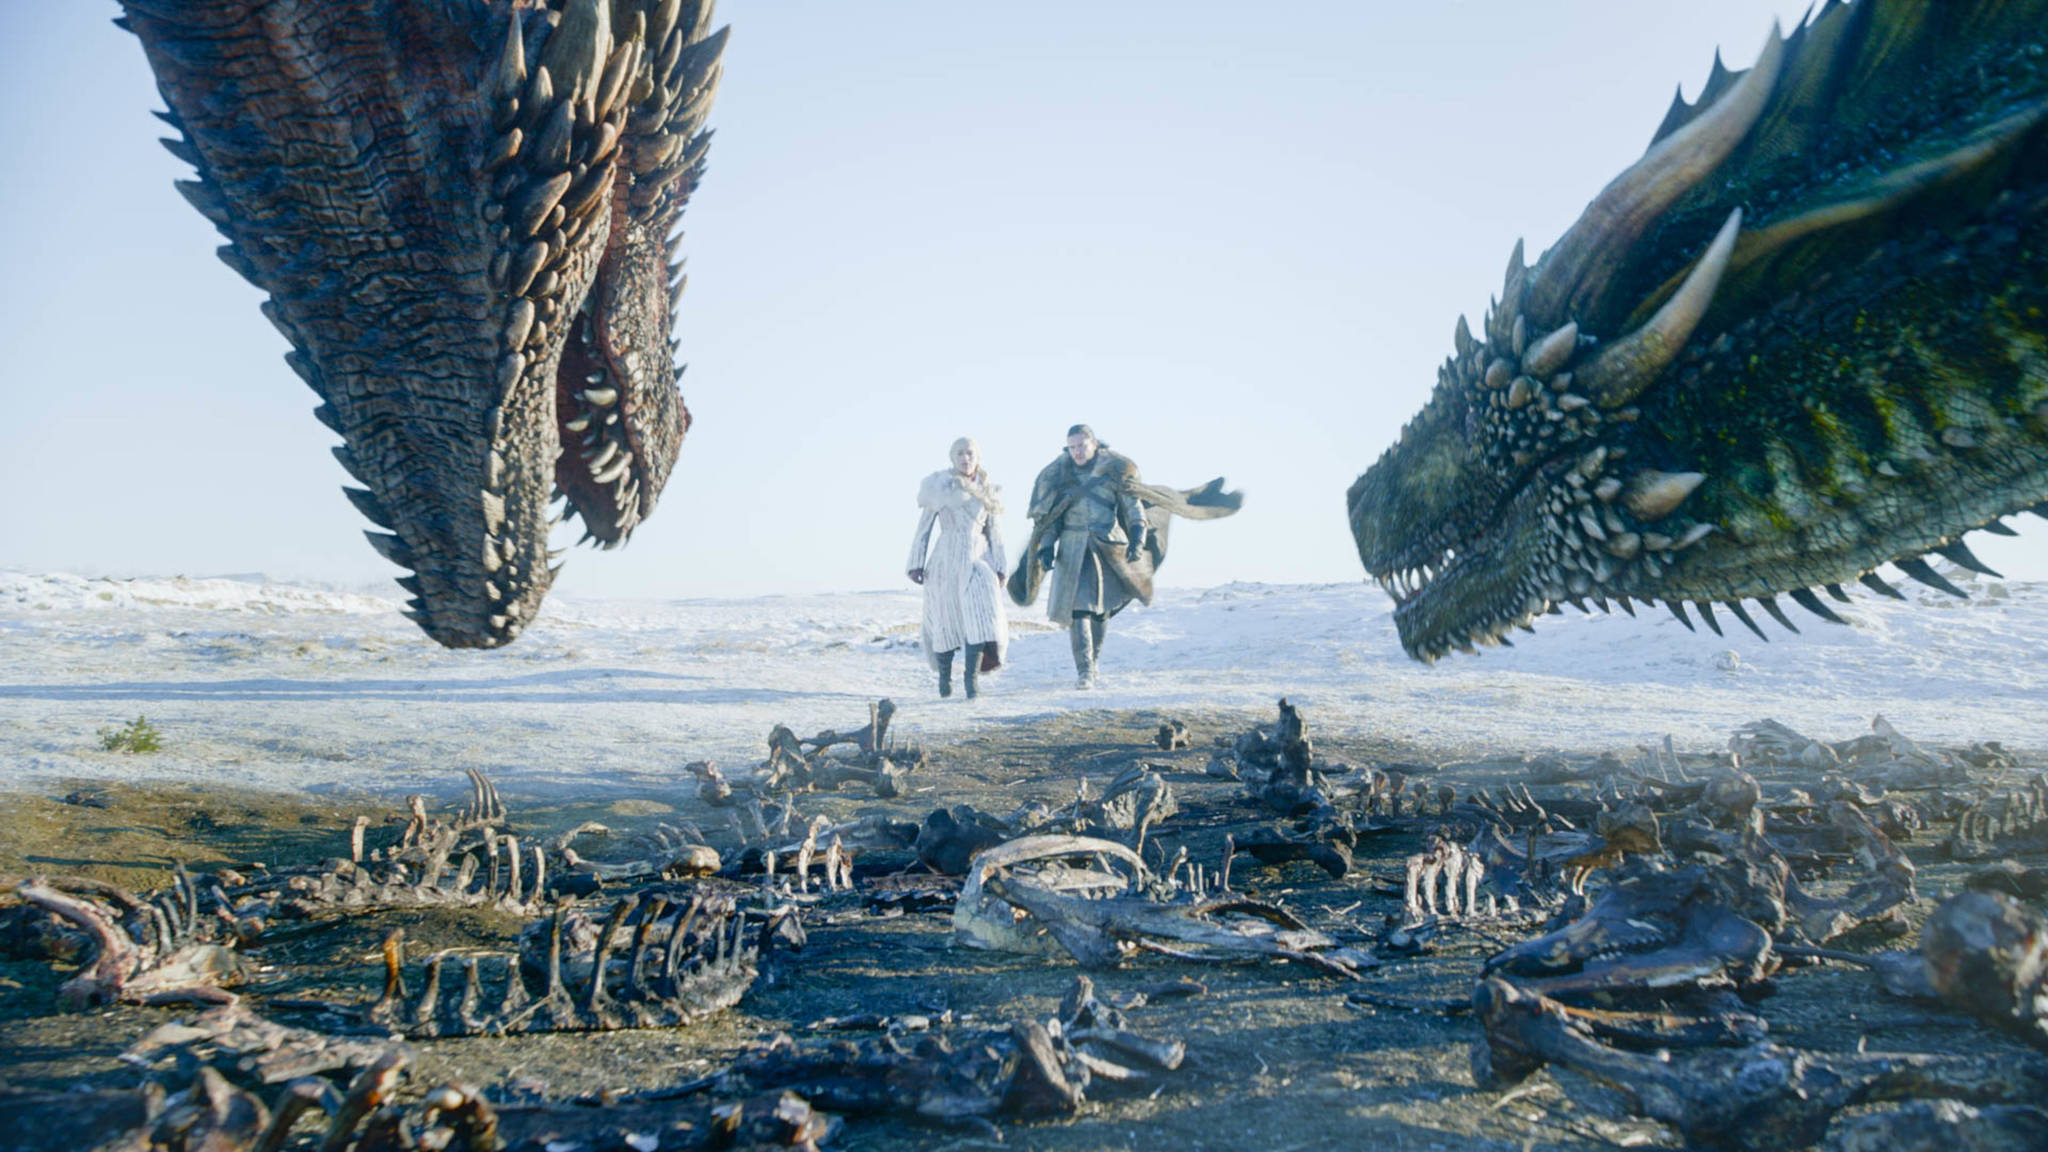 Game of Thrones', 'Veep' take top prizes again at Emmys